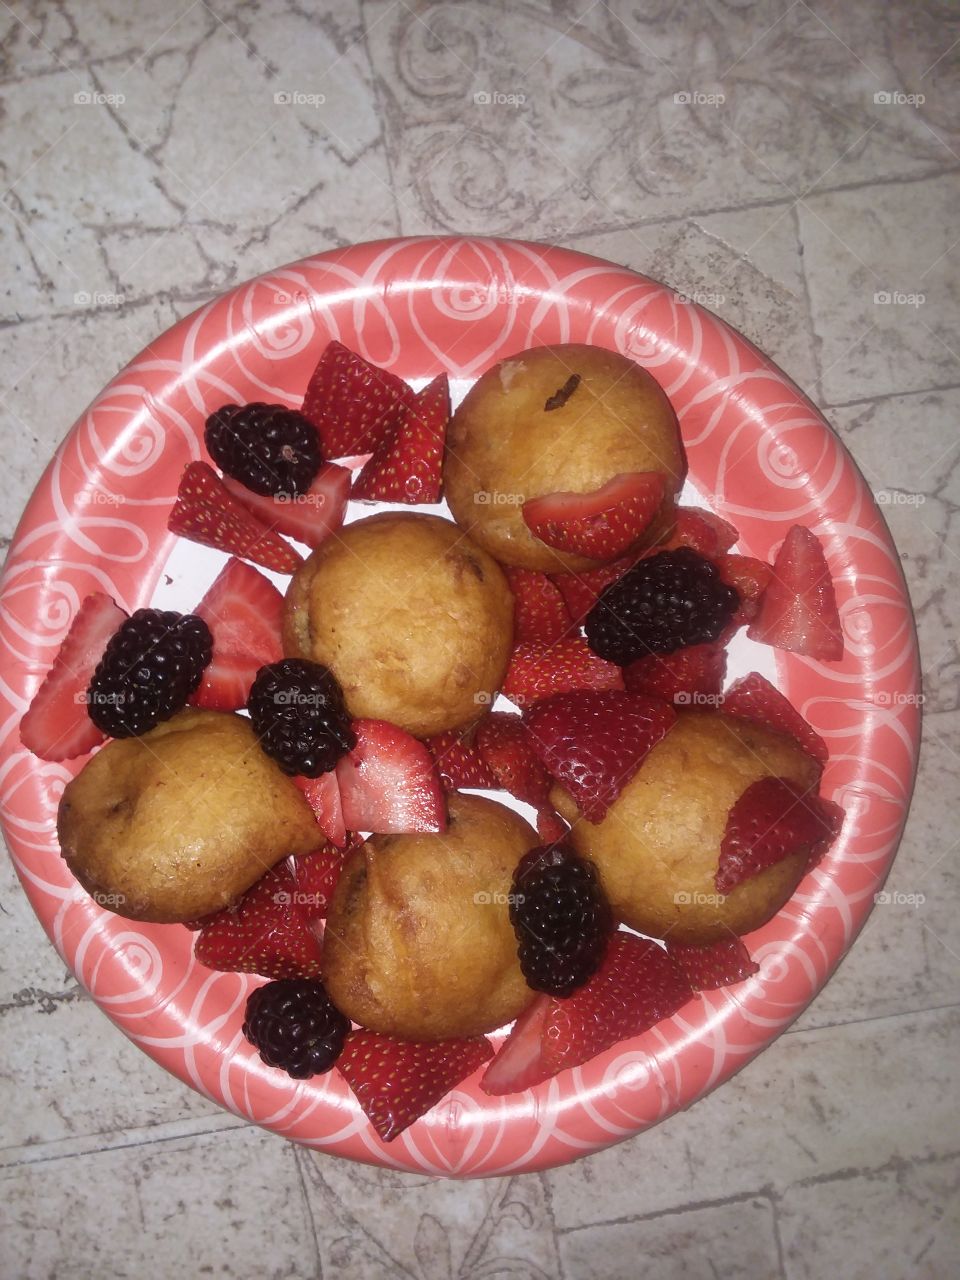 homemade fried Oreos with Berries